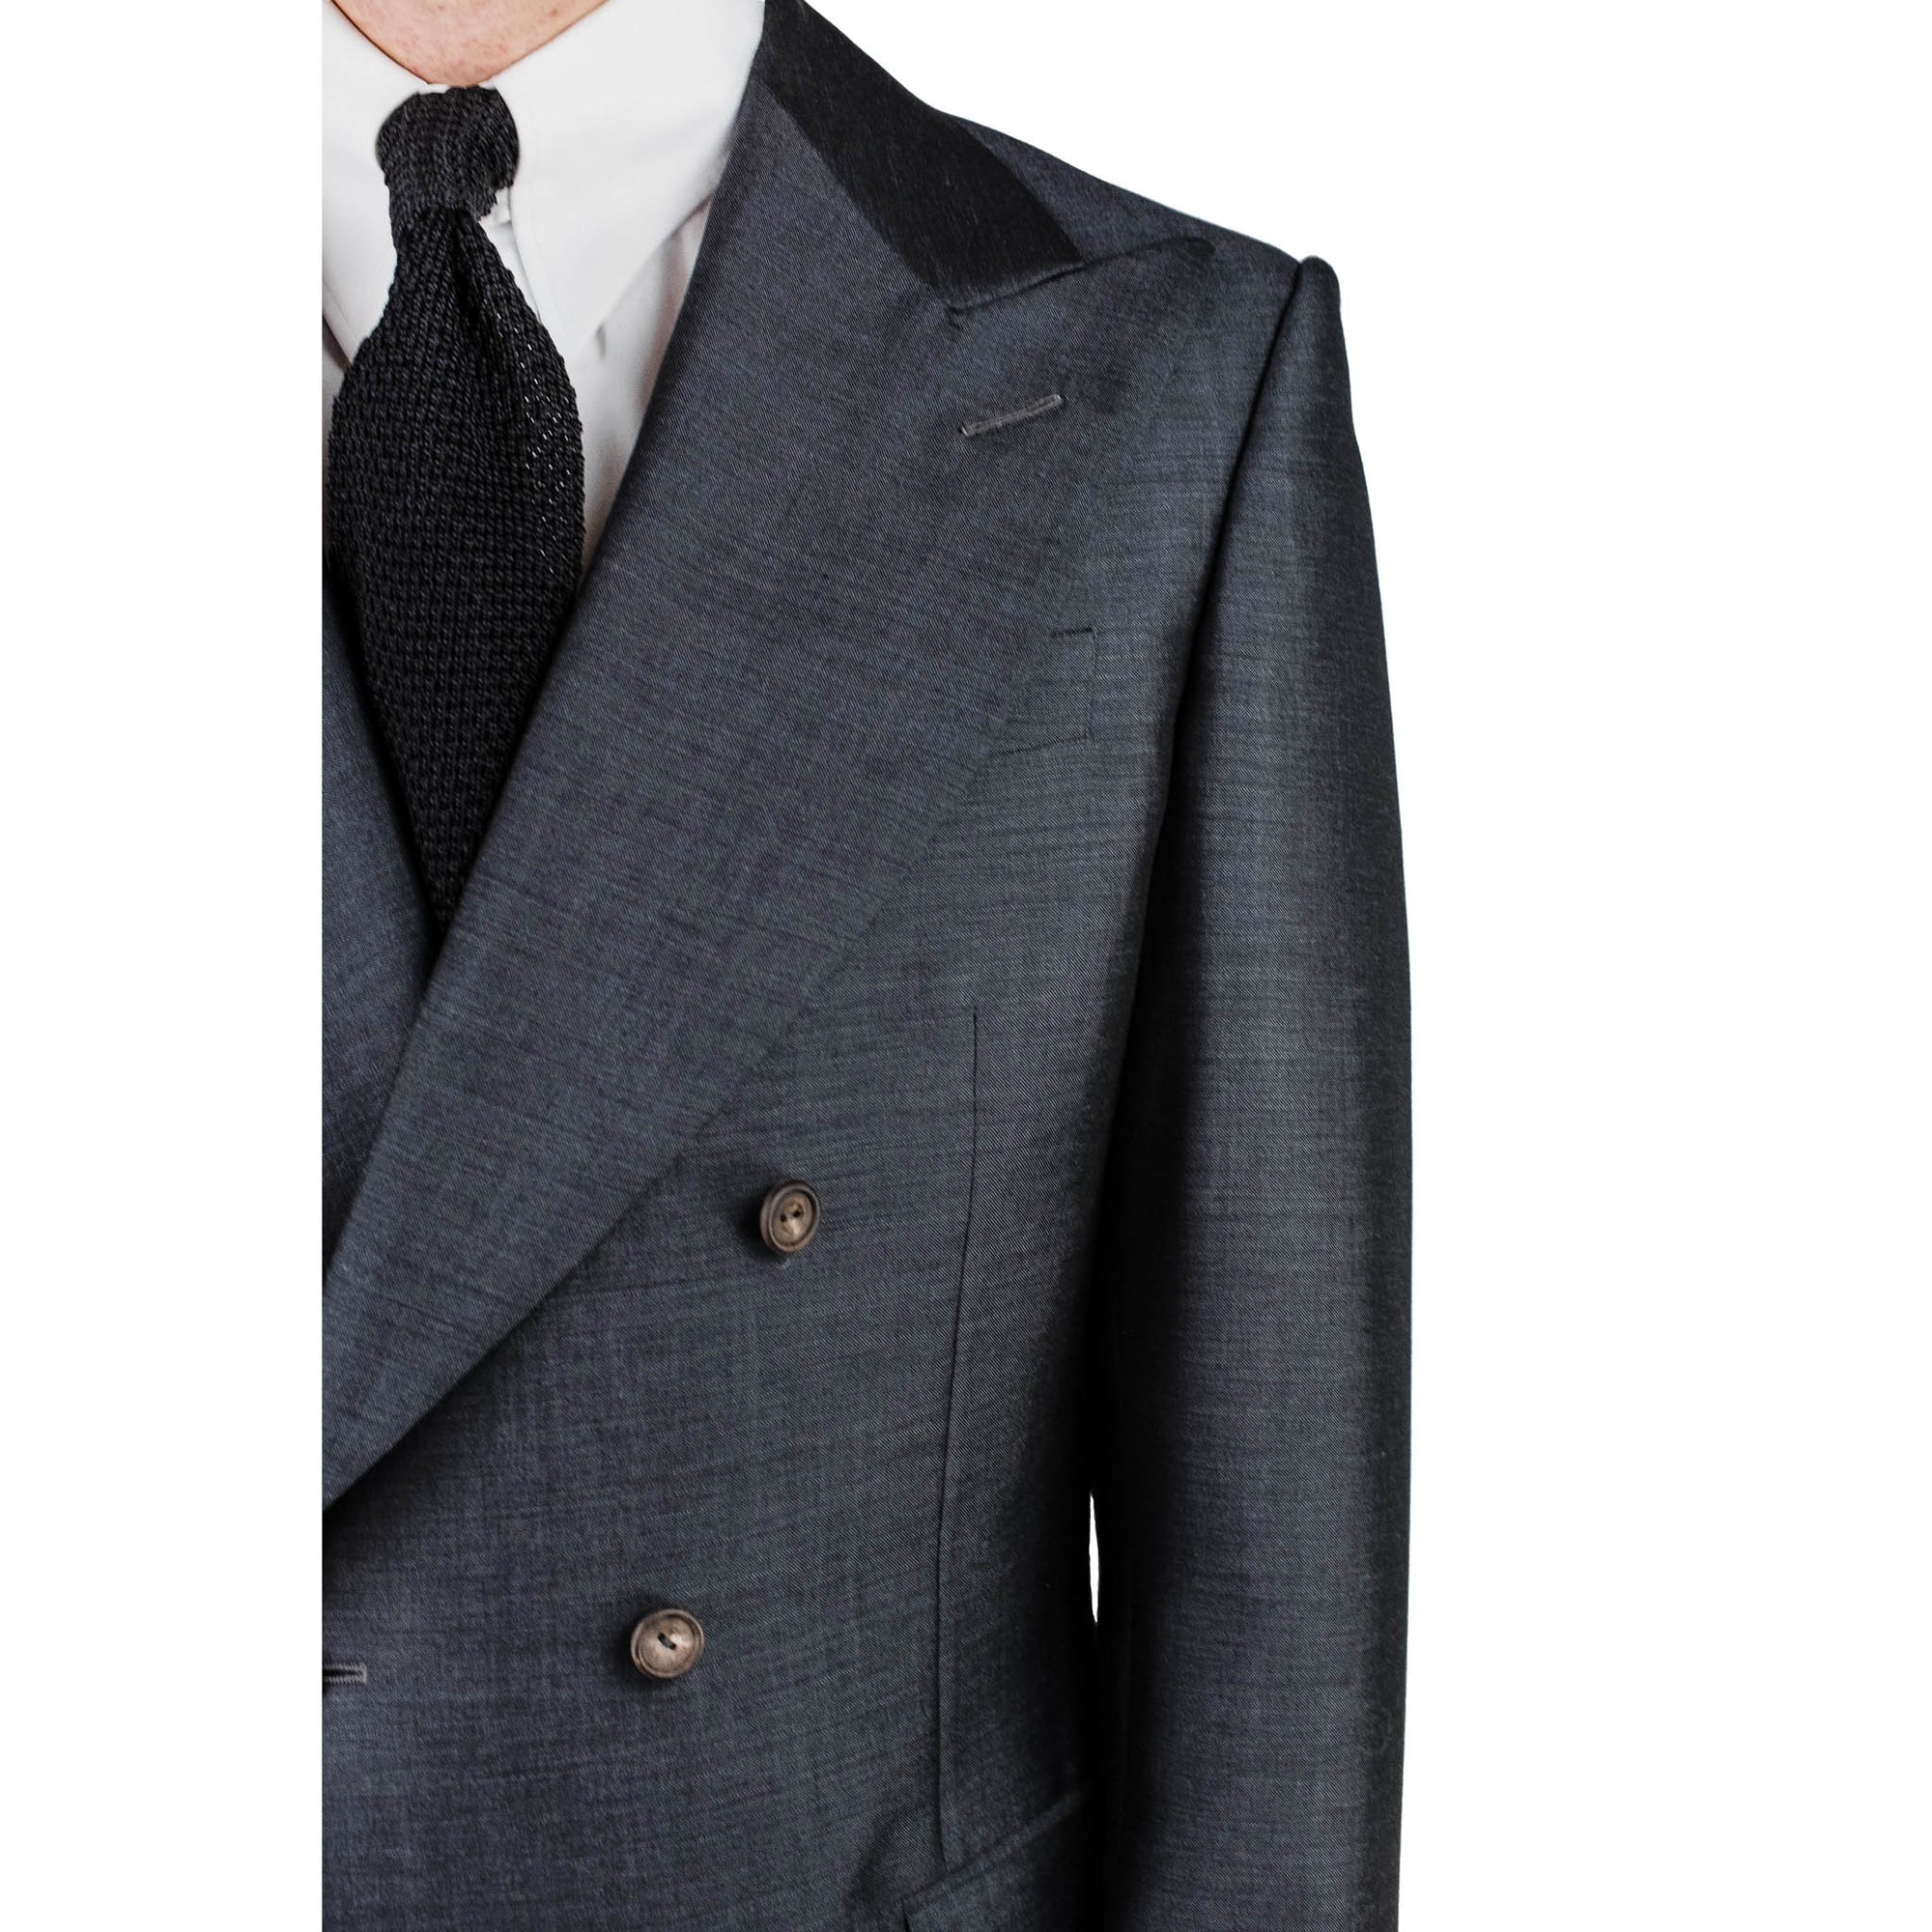 Suit - Charcoal wool-mohair blend